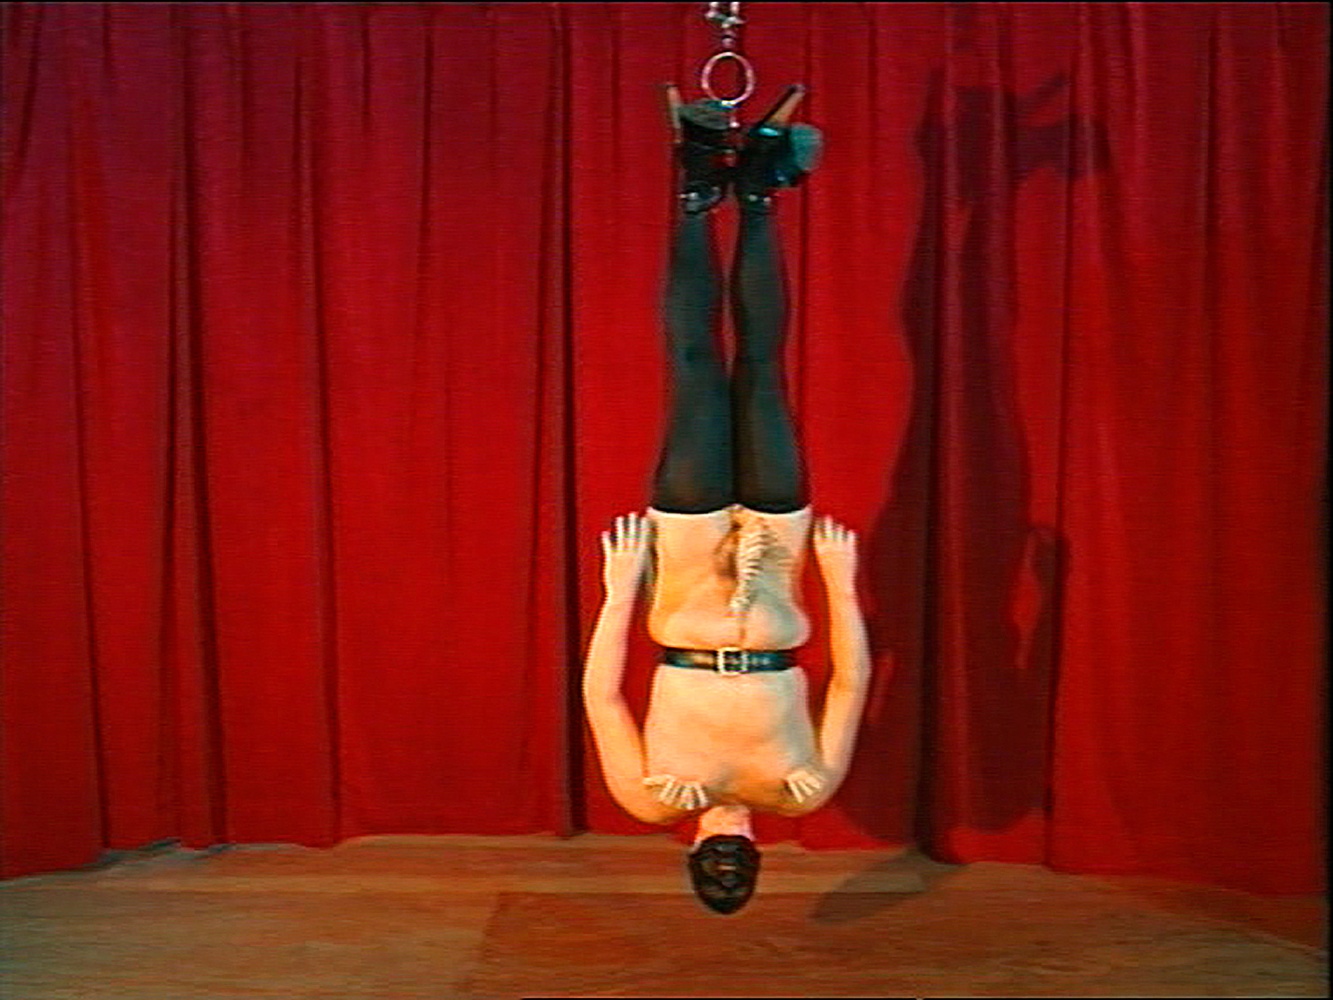 Charles Atlas

The Hanged One, 1997

Fifteen-channel video, mixed media, programmed lighting

Installation view, Whitney Museum of American Art, New York